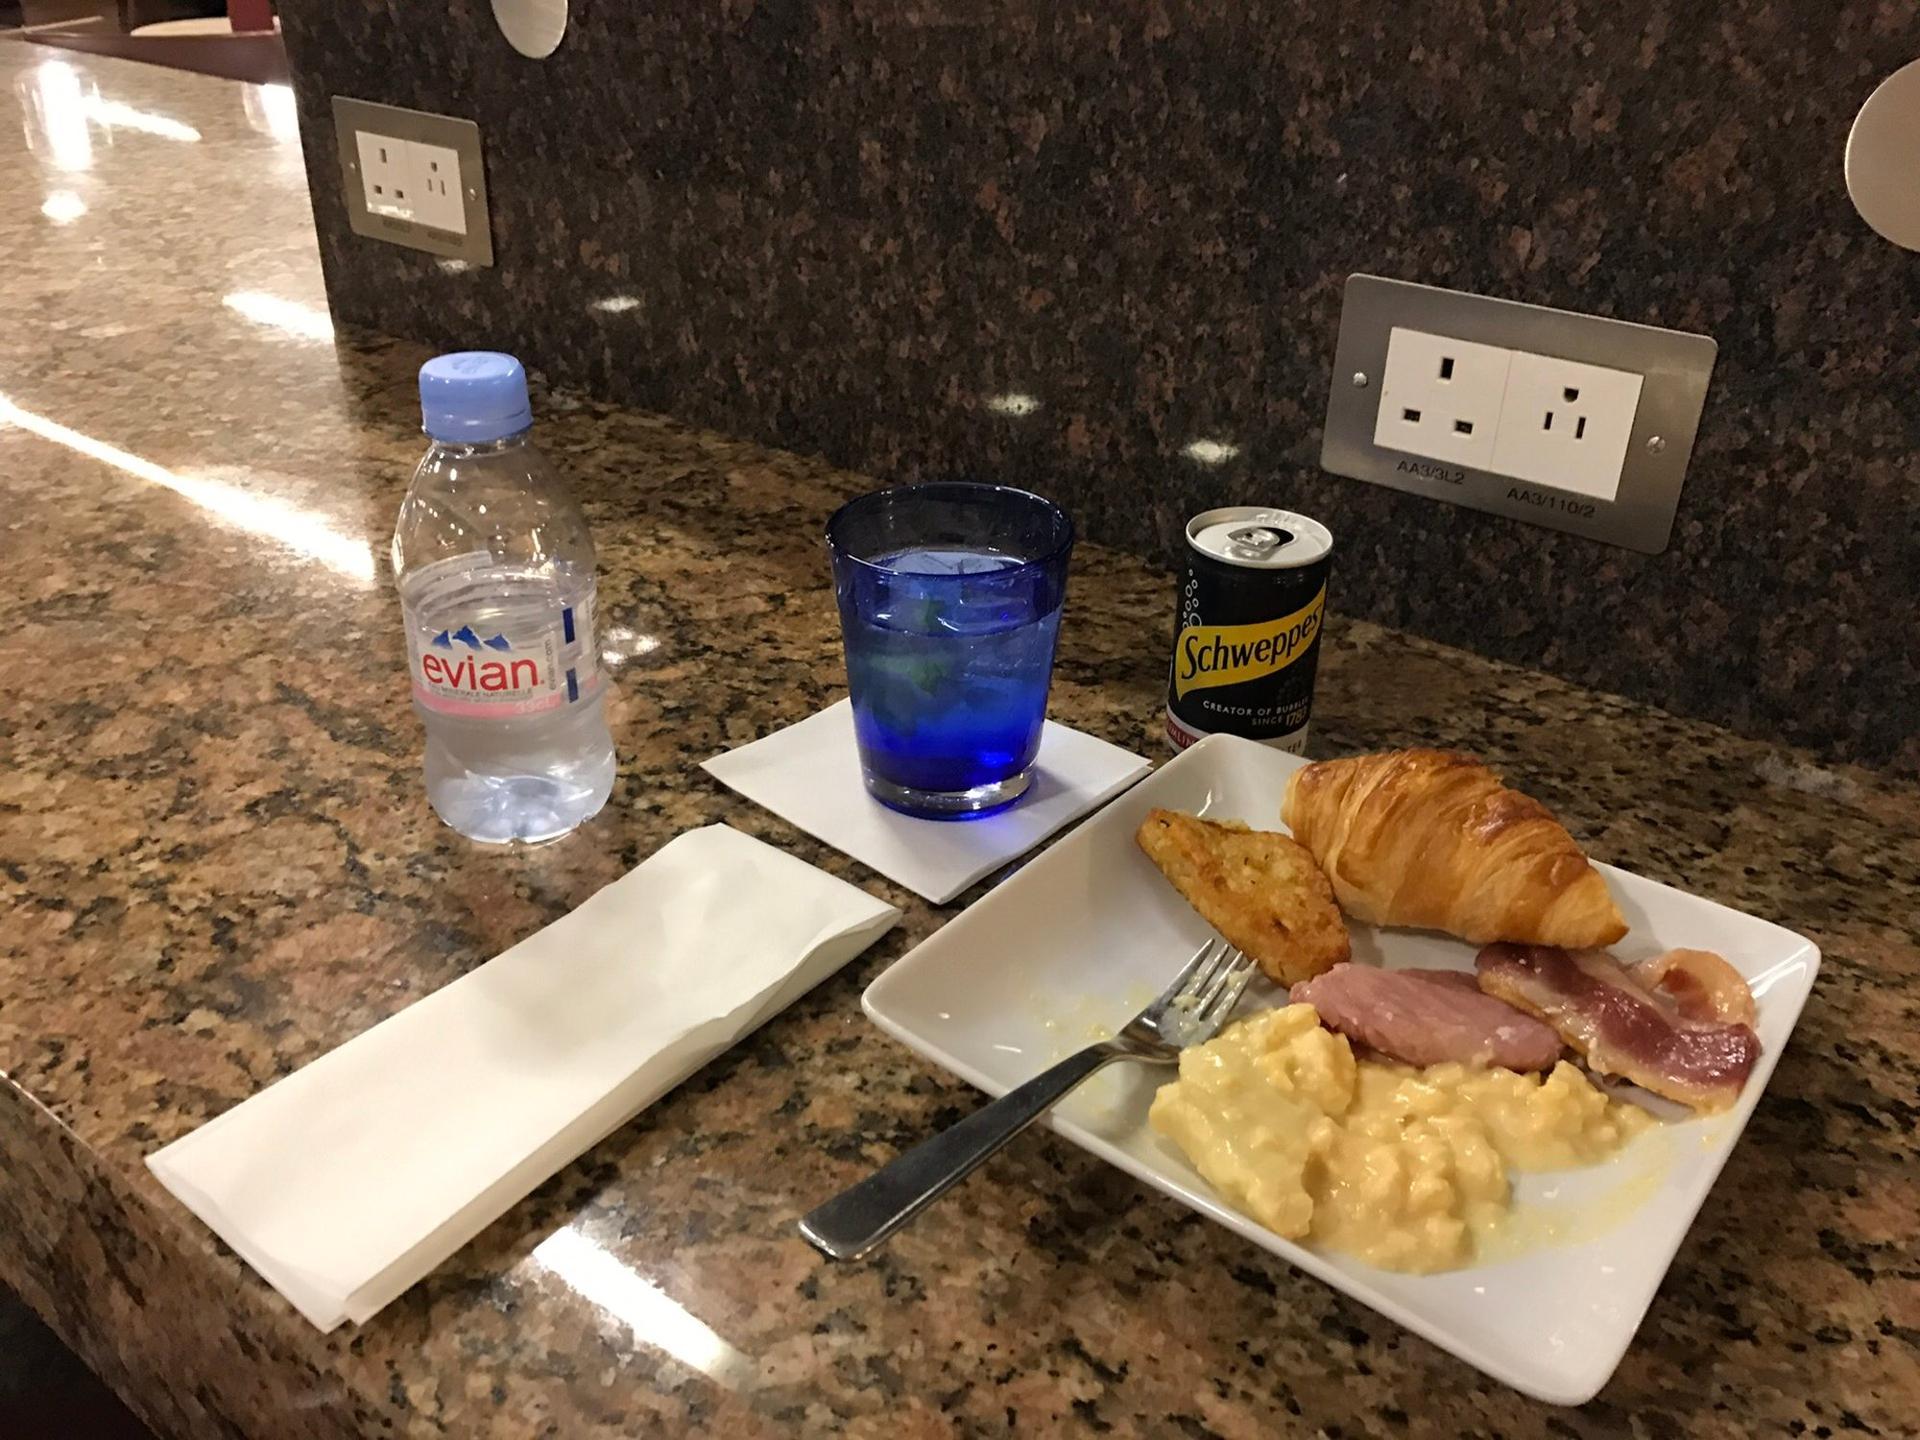 American Airlines International First Class Lounge image 13 of 16